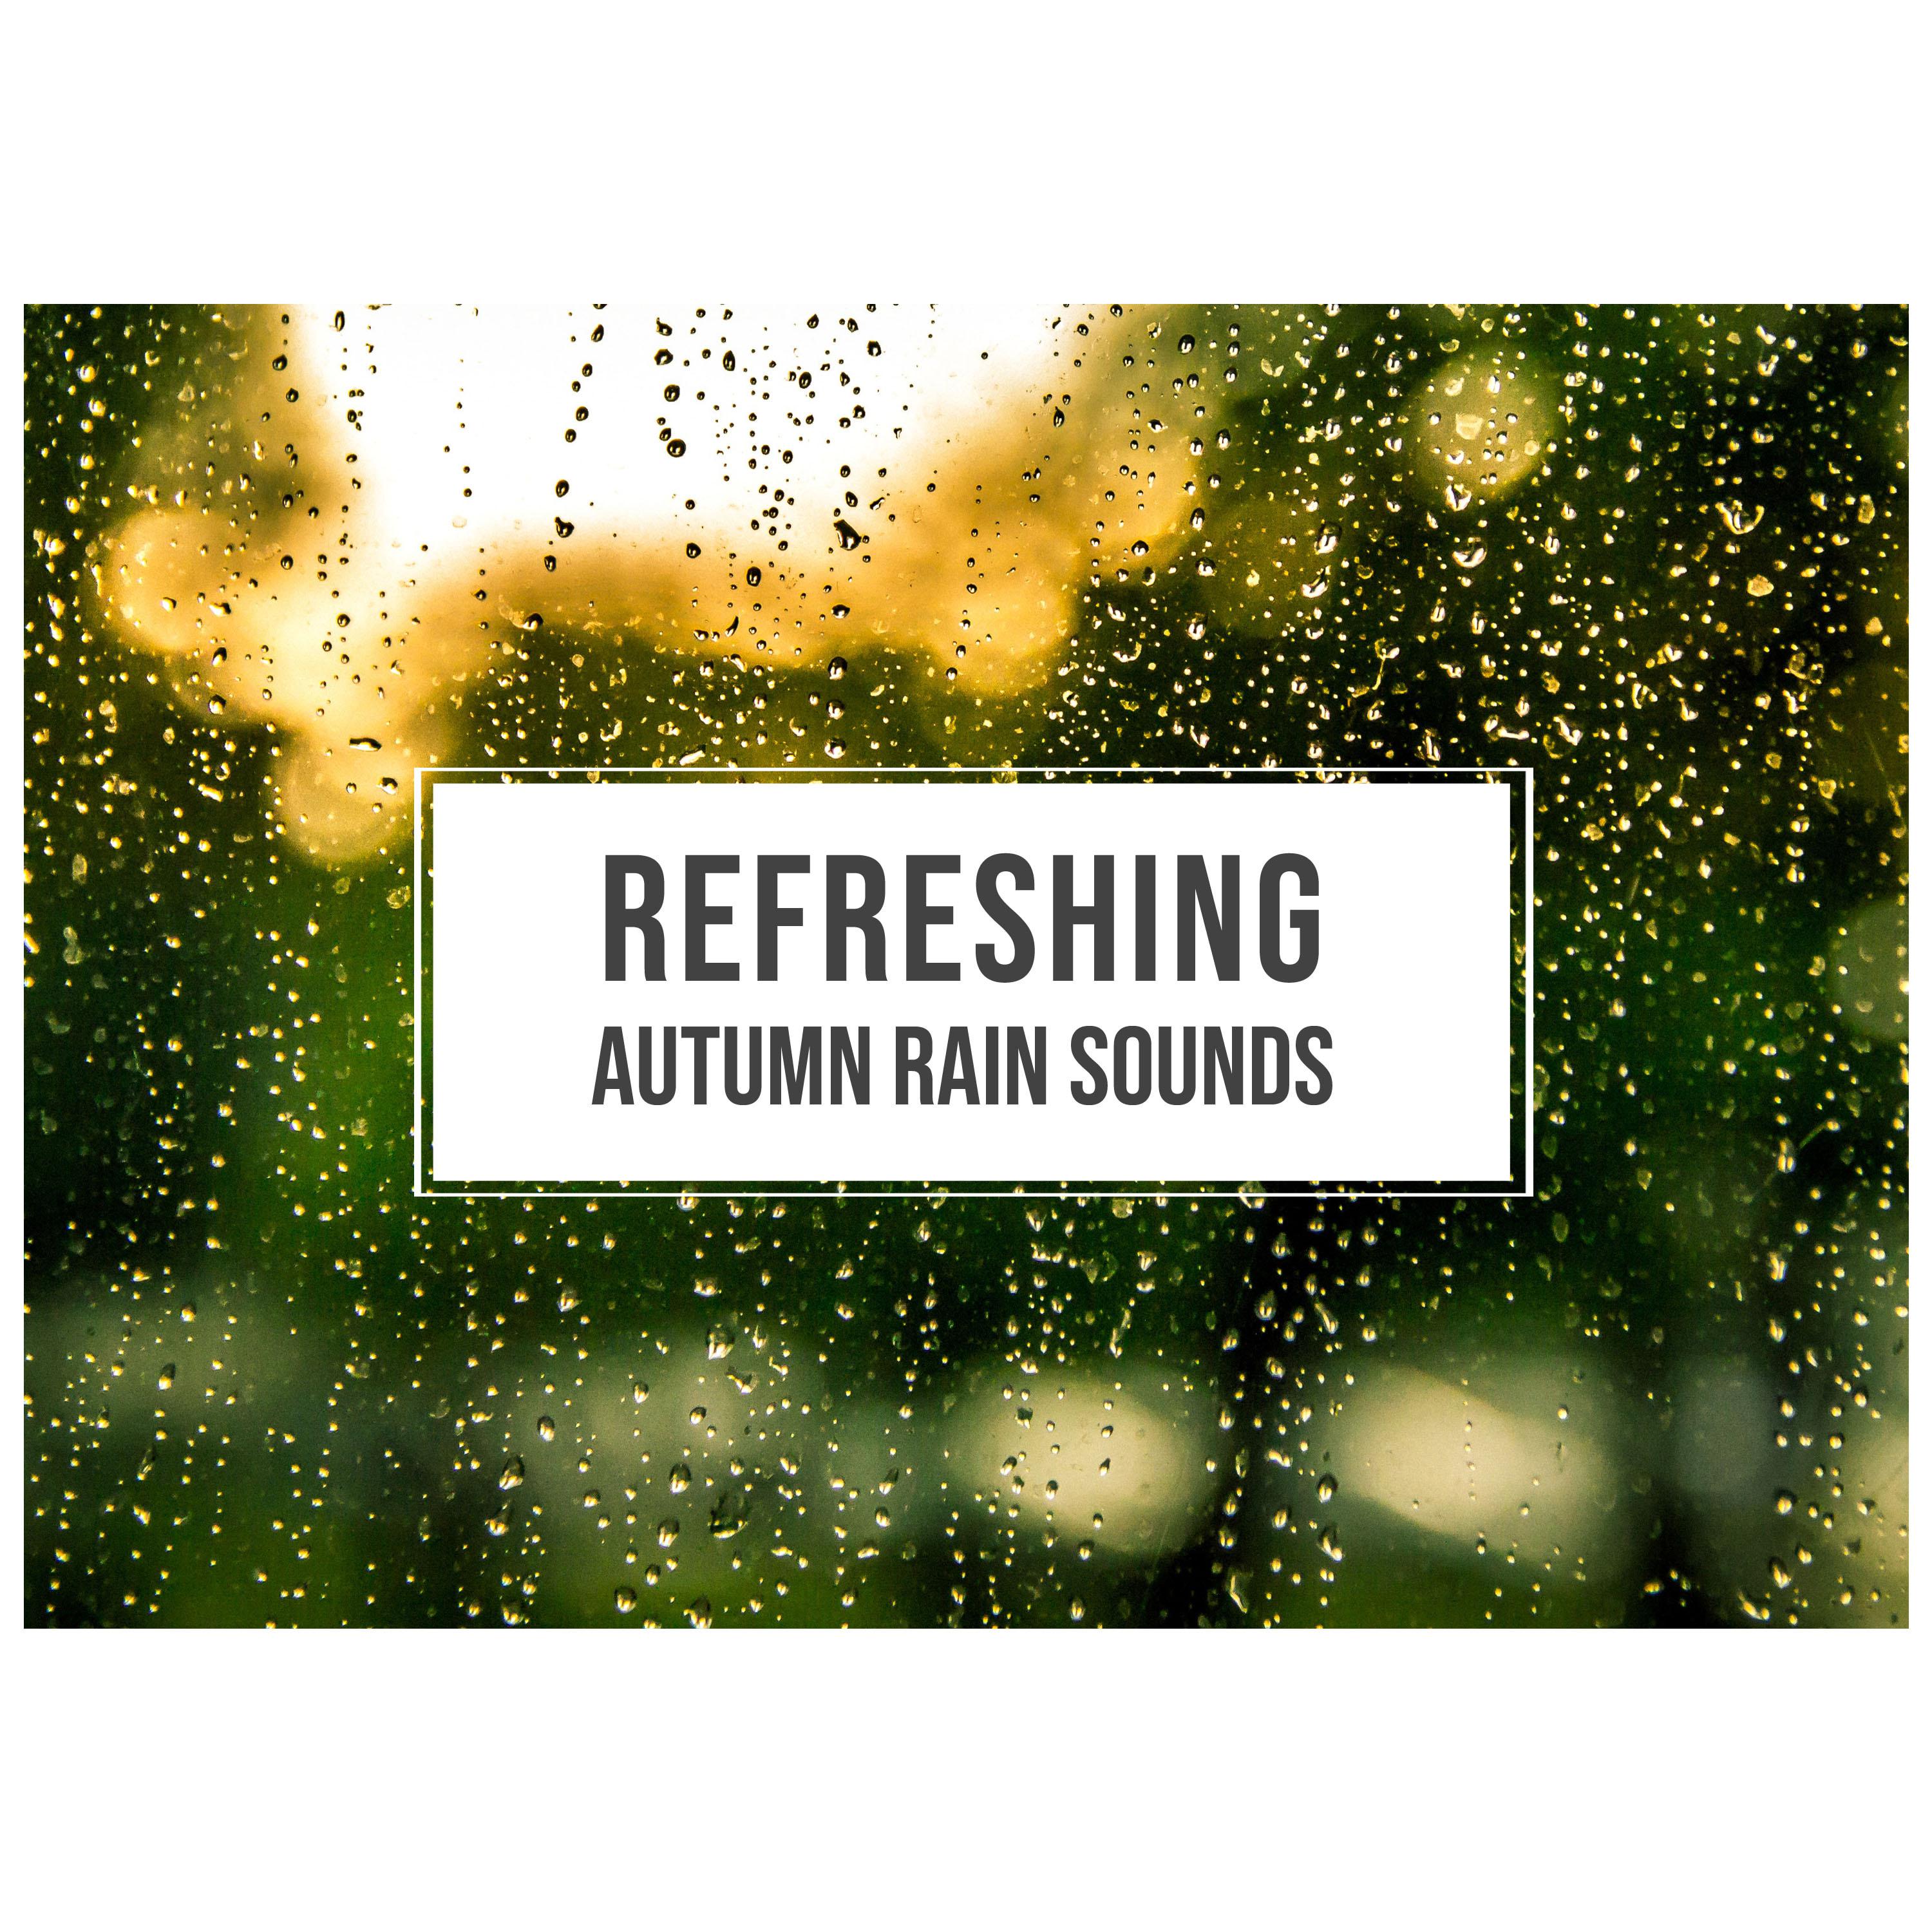 #16 Refreshing Autumn Rain Sounds from Mother Nature